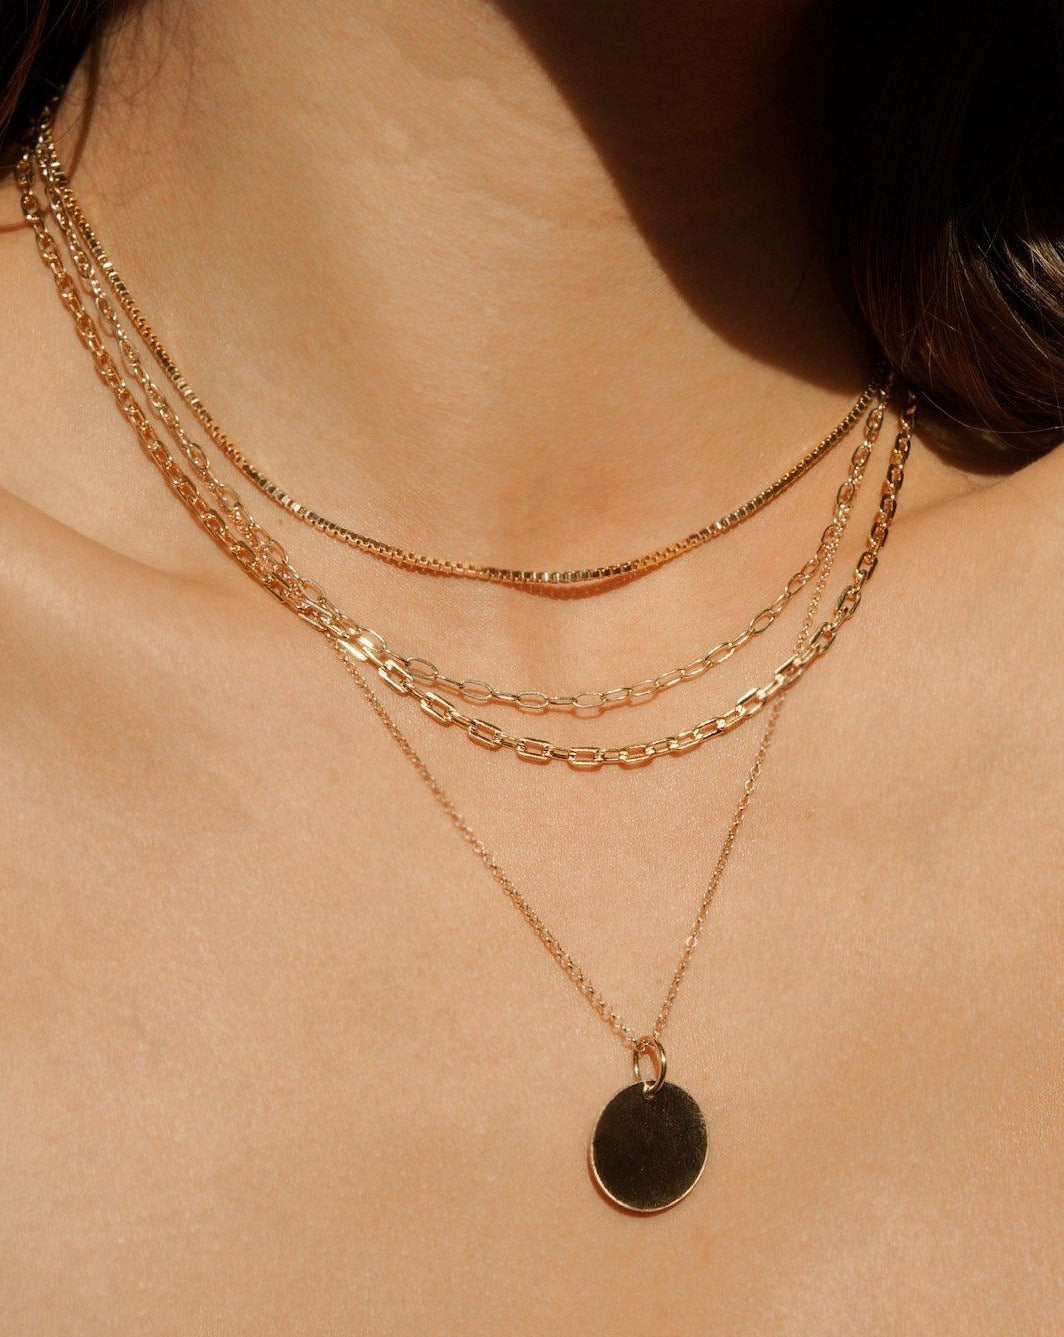 Jova Necklace by KOZAKH. A 14 to 16 inch adjustable length, 5mm Box chain necklace in 14K Gold Filled.